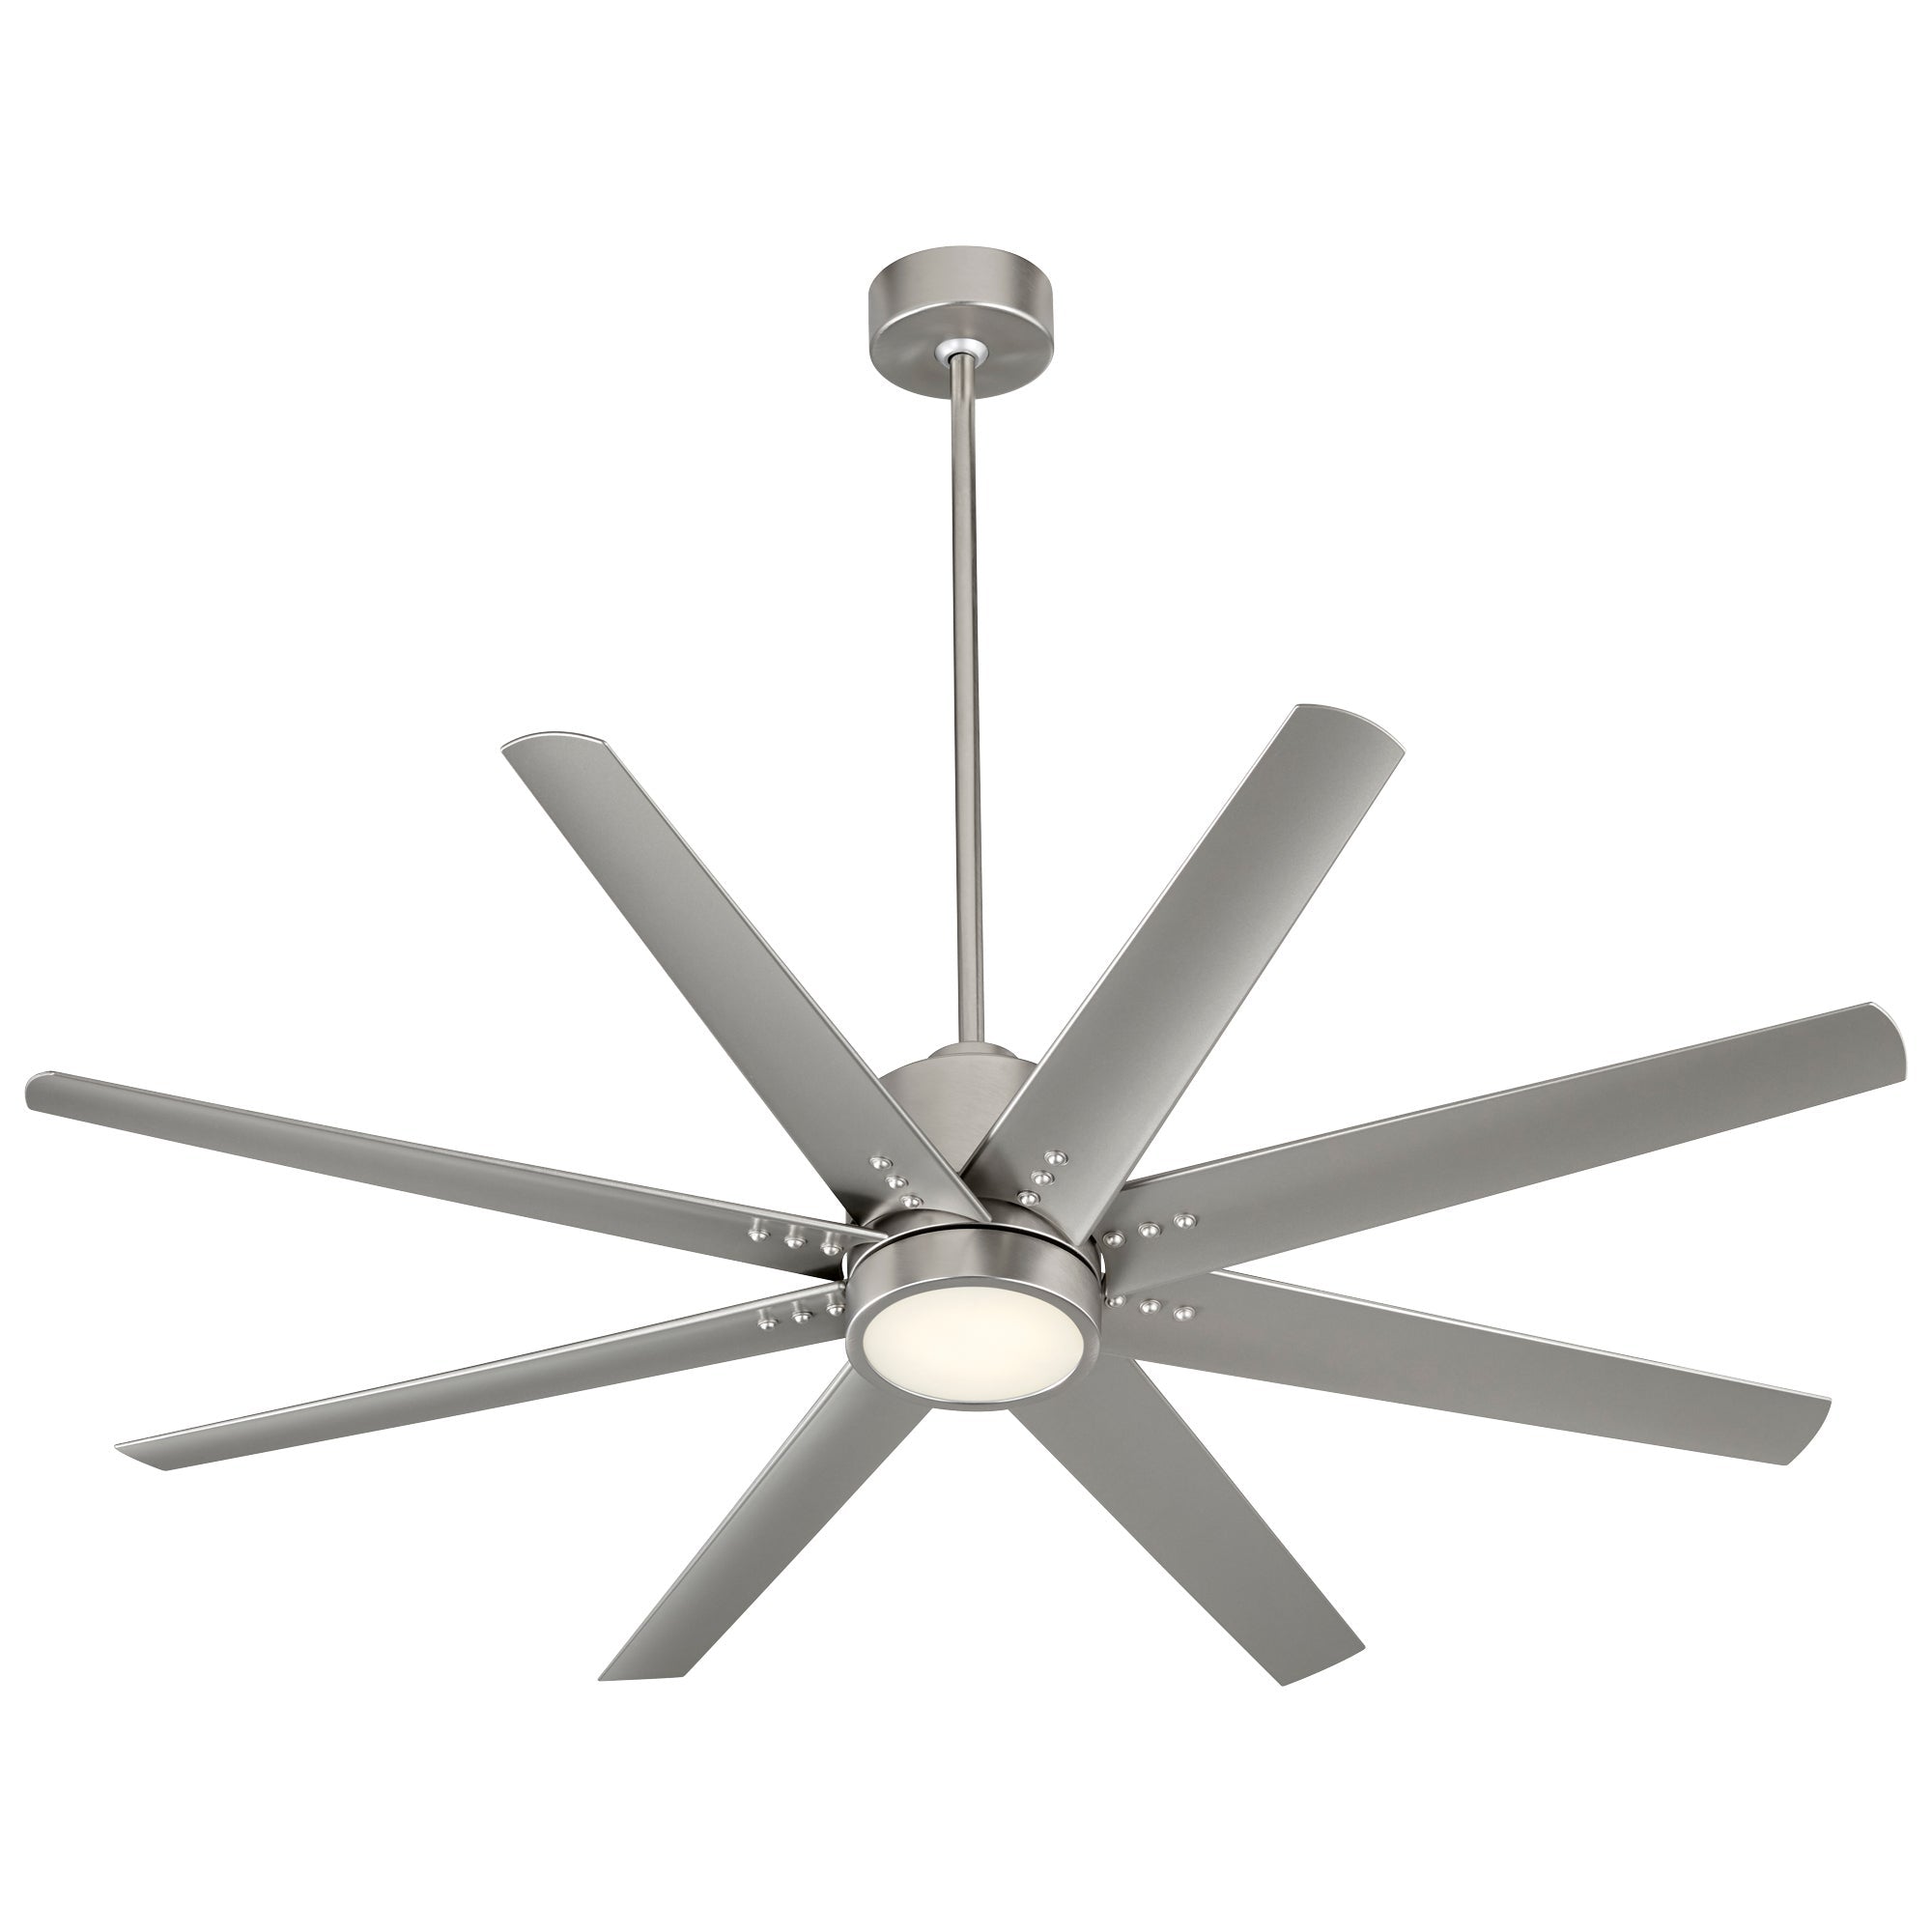 Oxygen FLEET Ceiling Fan 56 Inch Eight Blade Fan 6 Speed Reversible with Remote and Optional LED Light Kit, Damp Rated